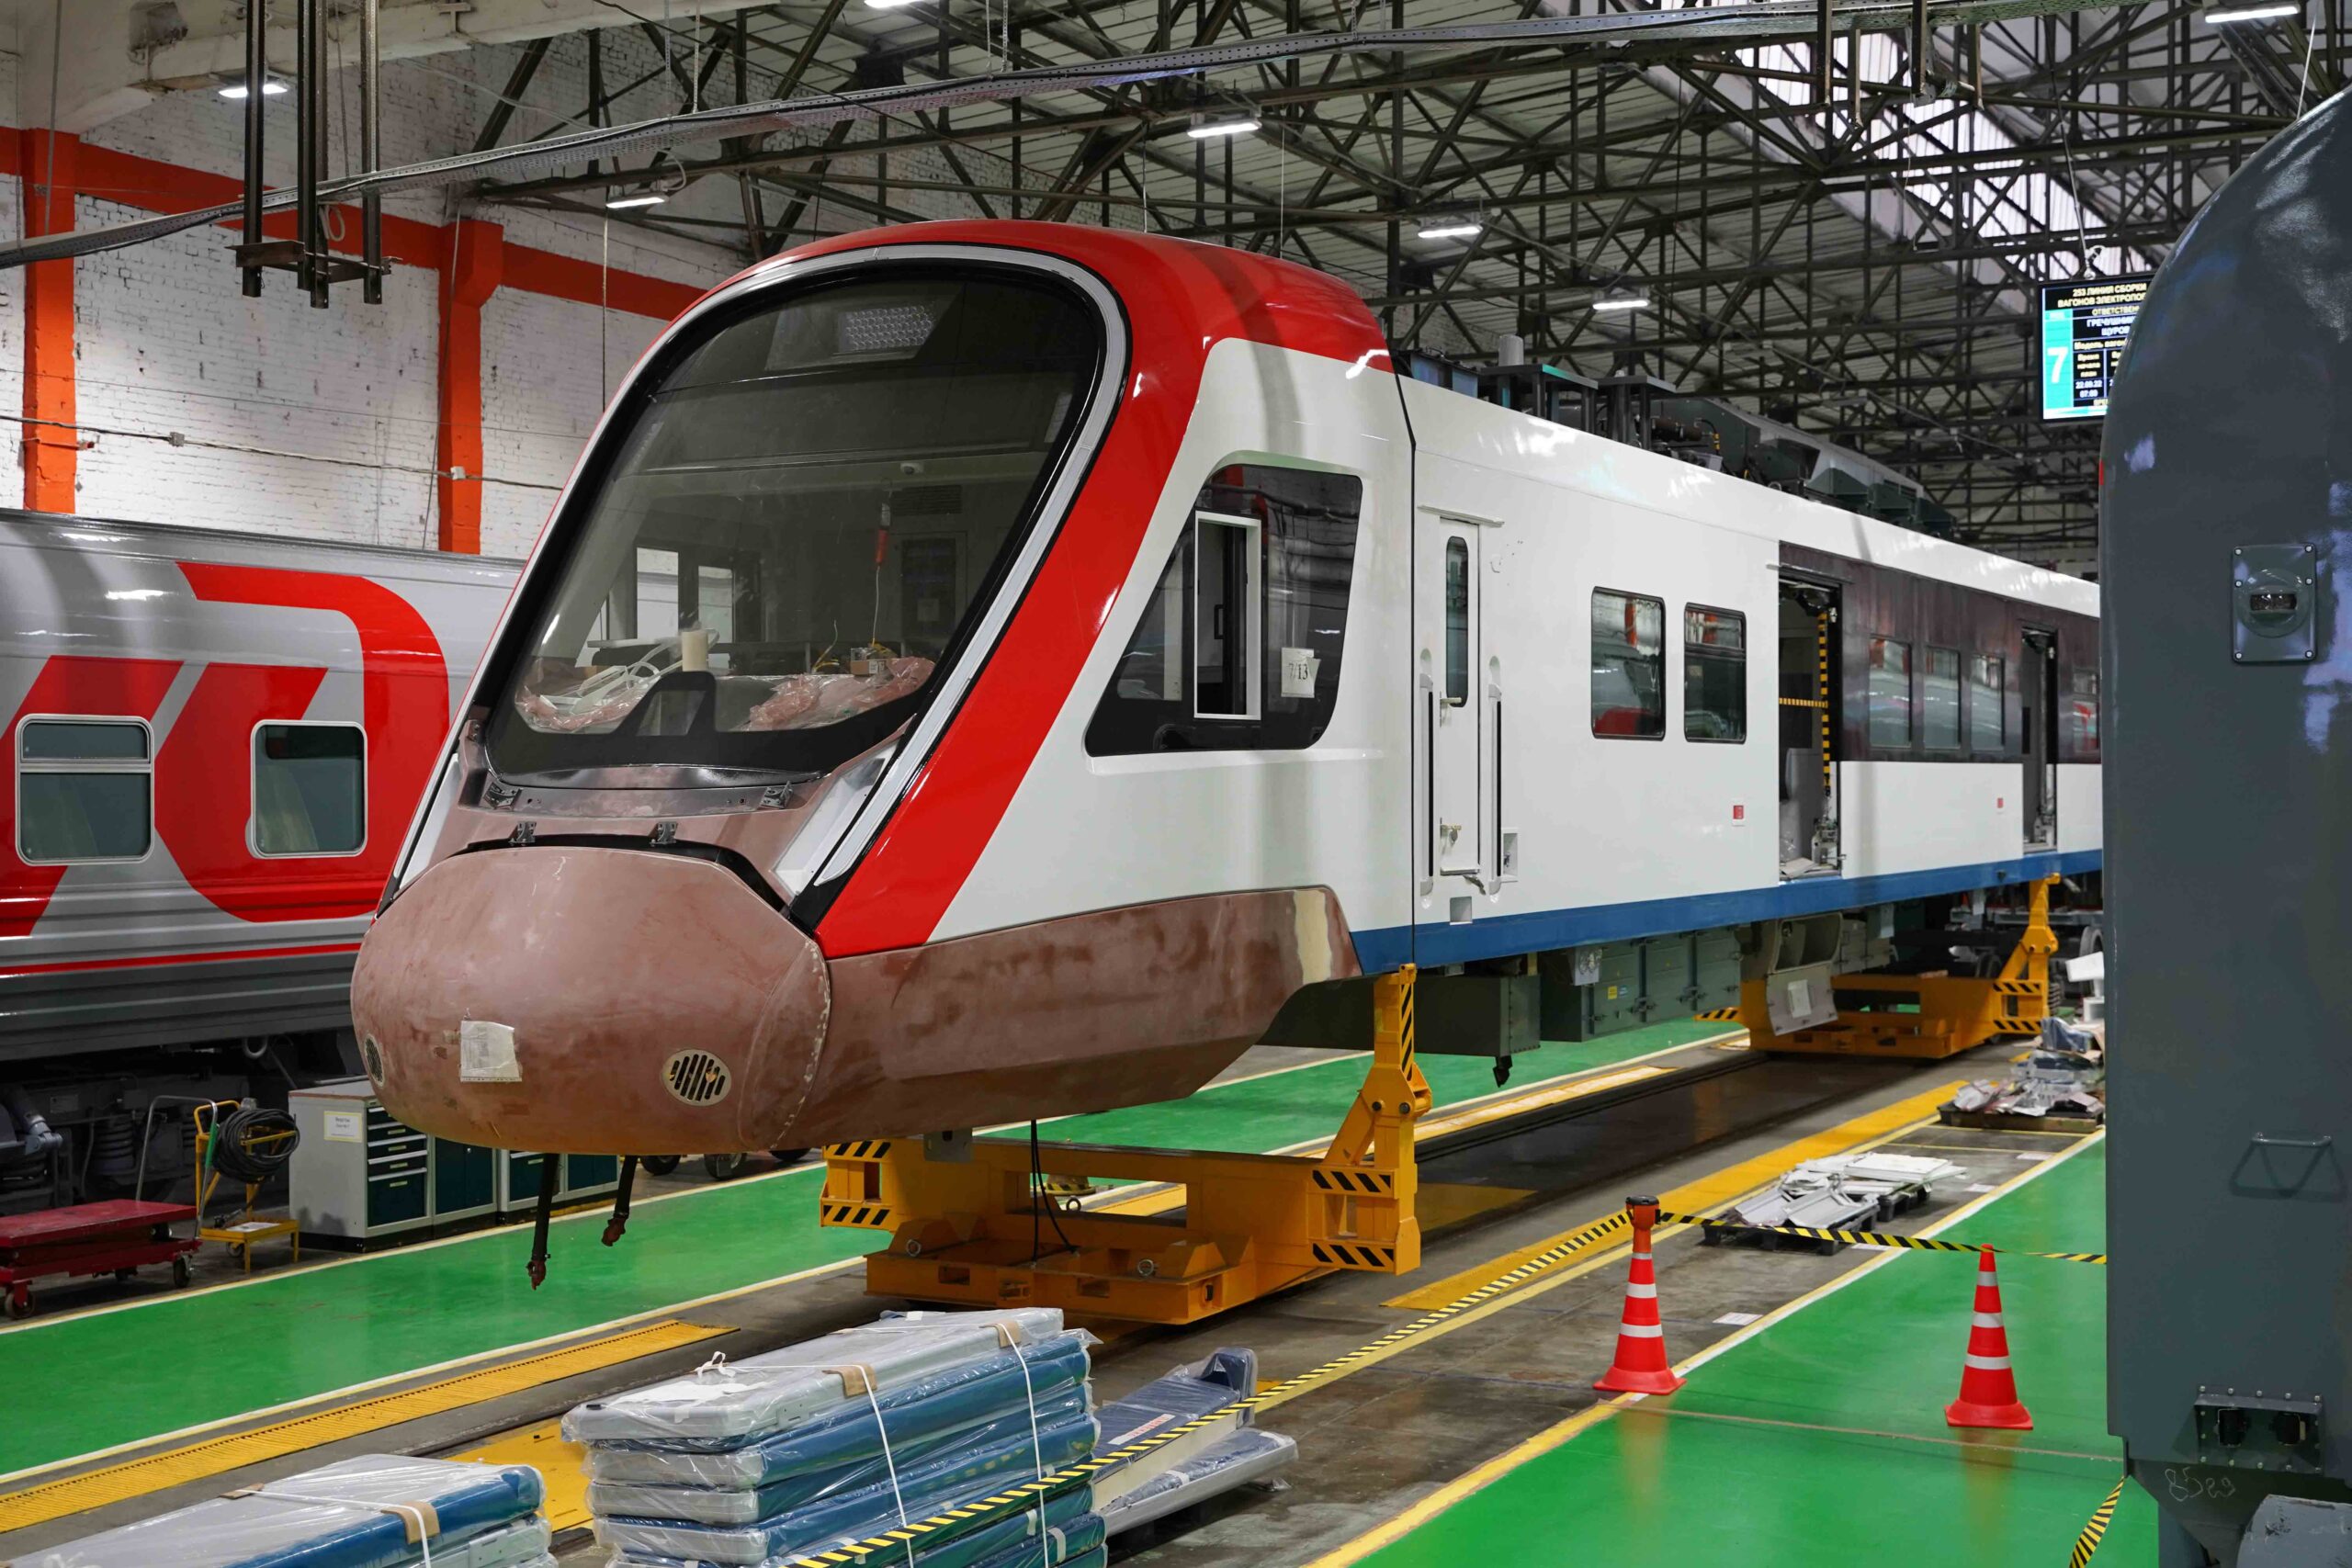 Production of the EGE2Tv Ivolga EMU at TMH's site in Tver